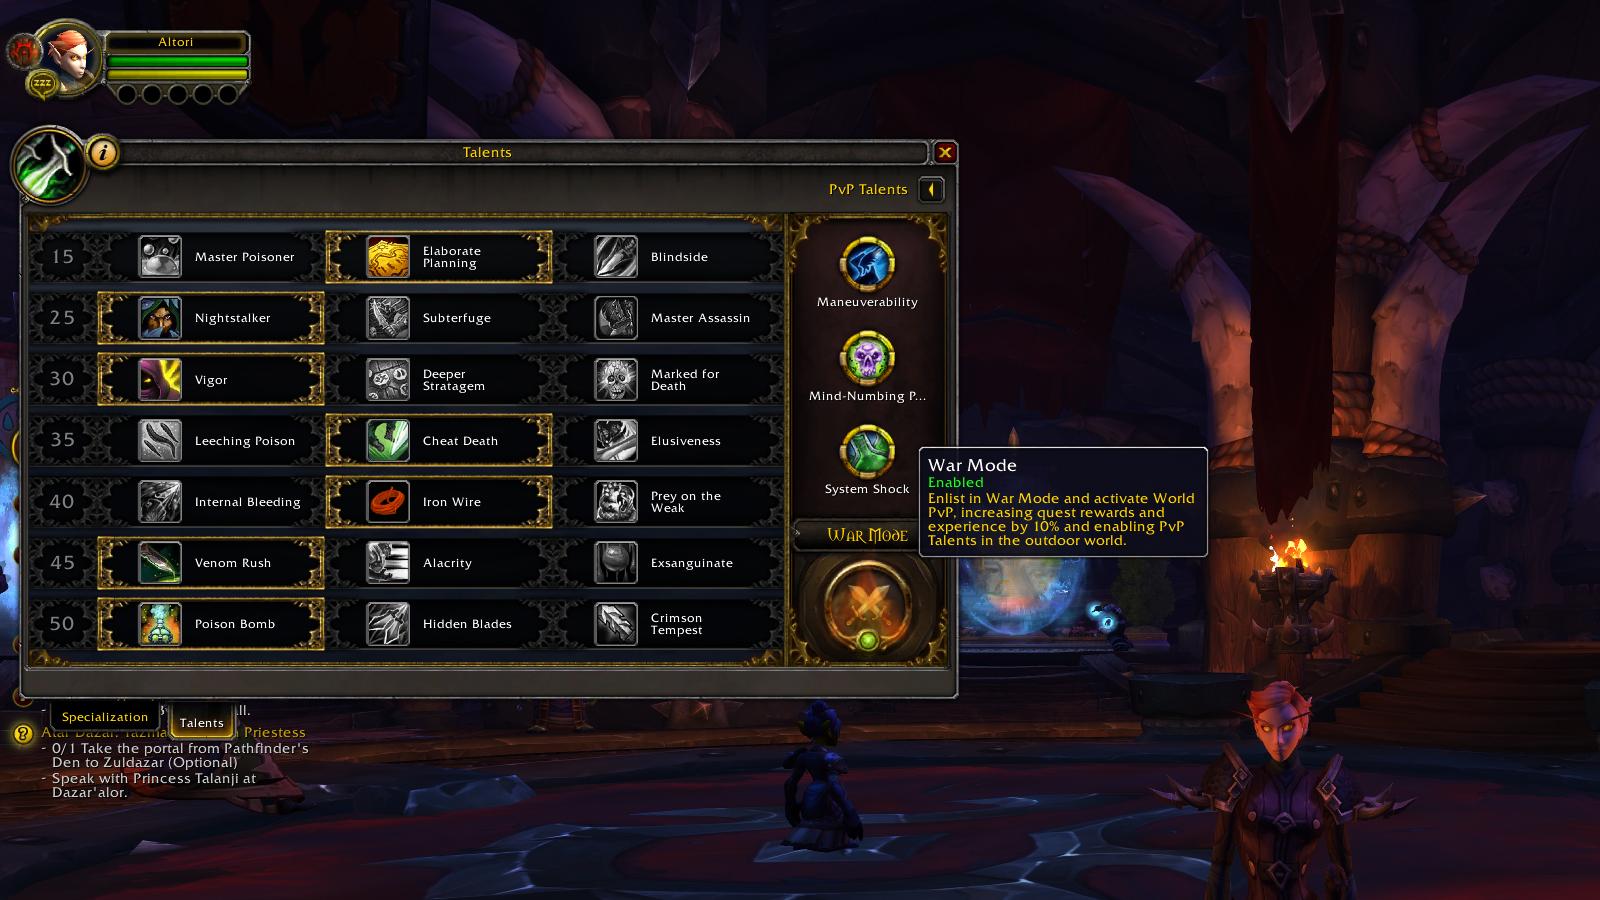 An image showing War Mode in World of Warcraft in the Talents panel